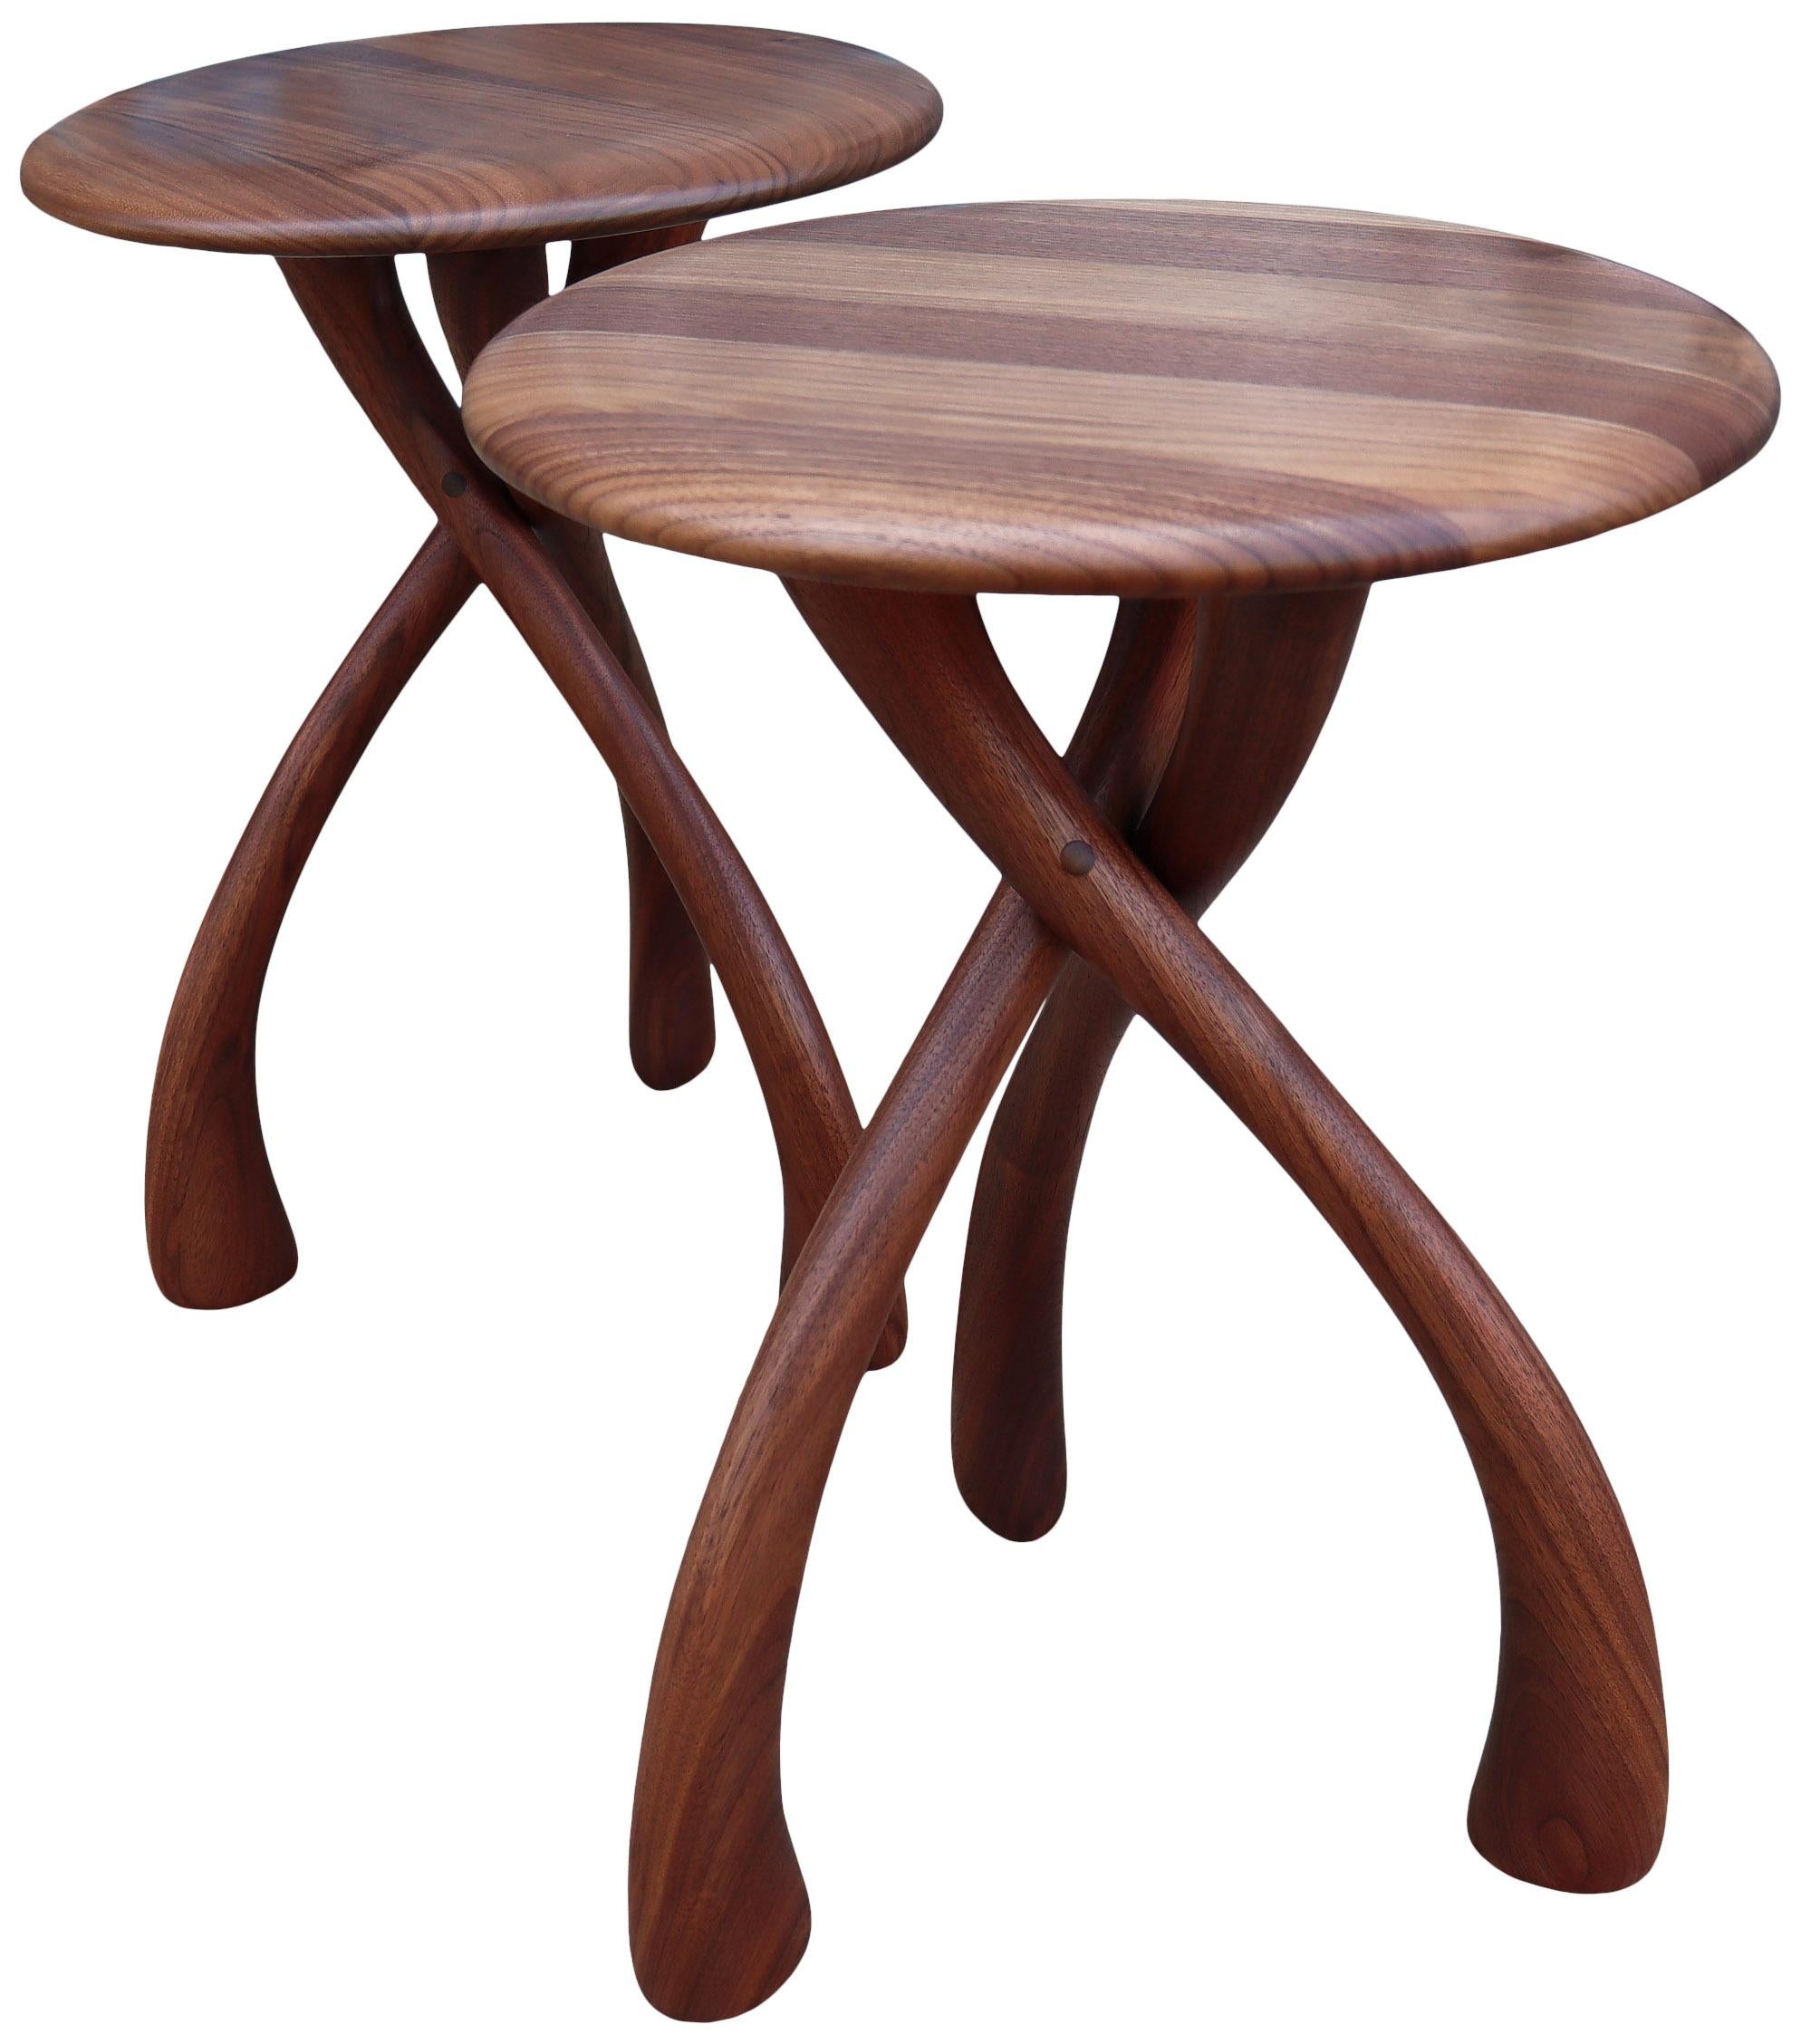 Beautiful wishbone round top tables designed by Dean Santner in black walnut.

Wonderful proportions make great use as a side table, end table, bedside tables or nightstands. A sensuous rounded waterfall edge with graceful carved lines. A